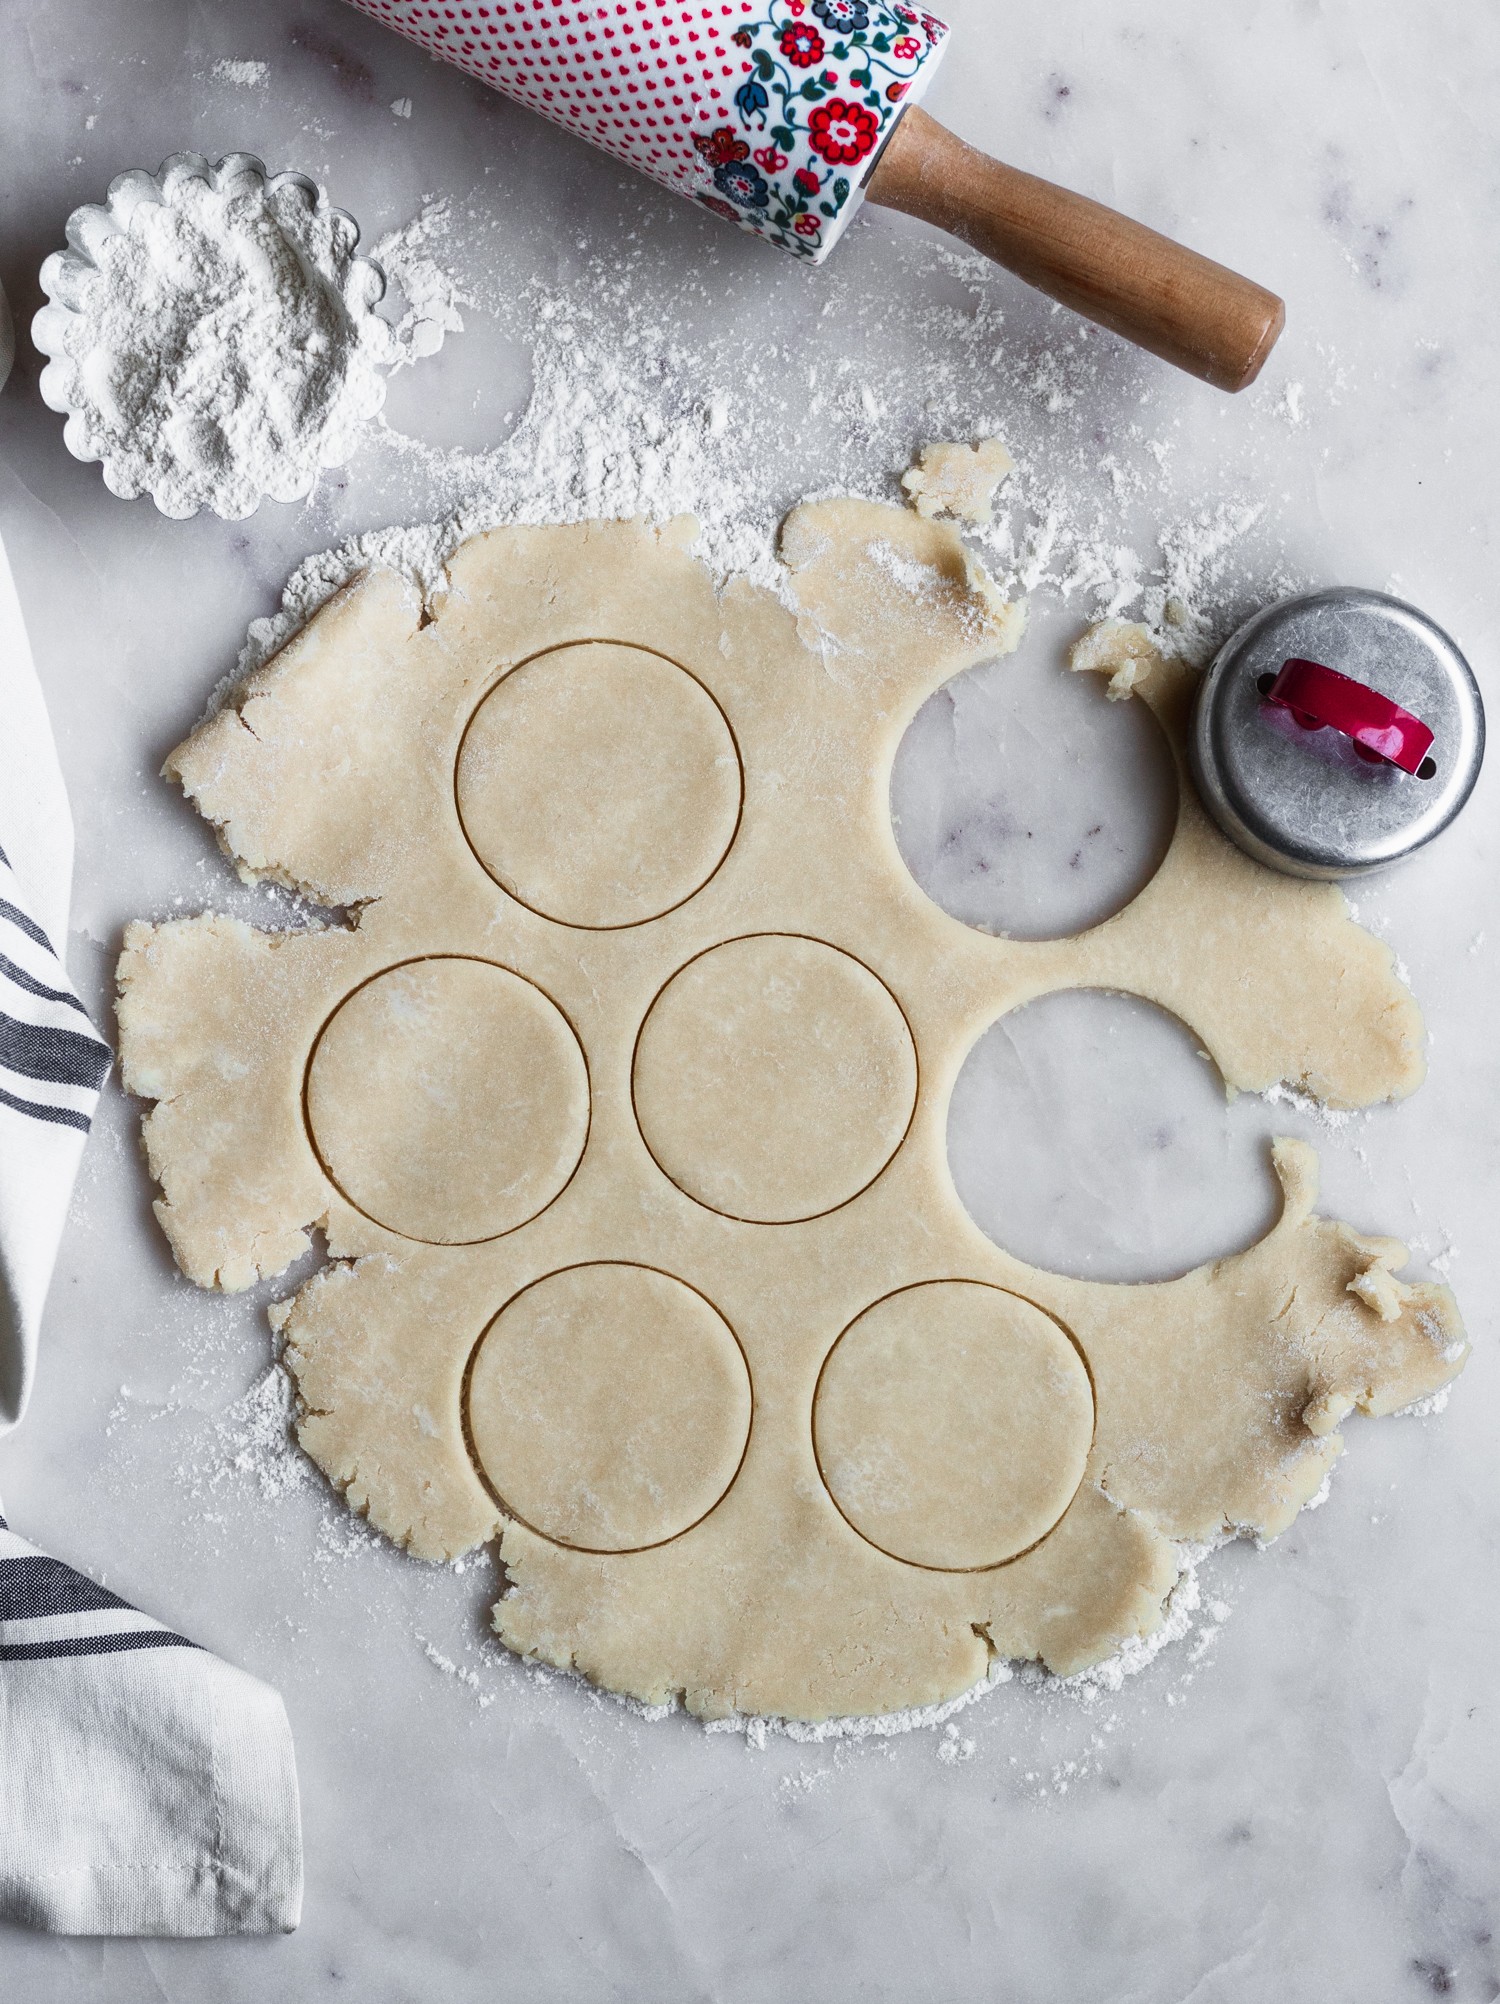 An overhead photo of pie dough with rounds cut out of it on a marble counter next to a bowl of flour and rolling pin.